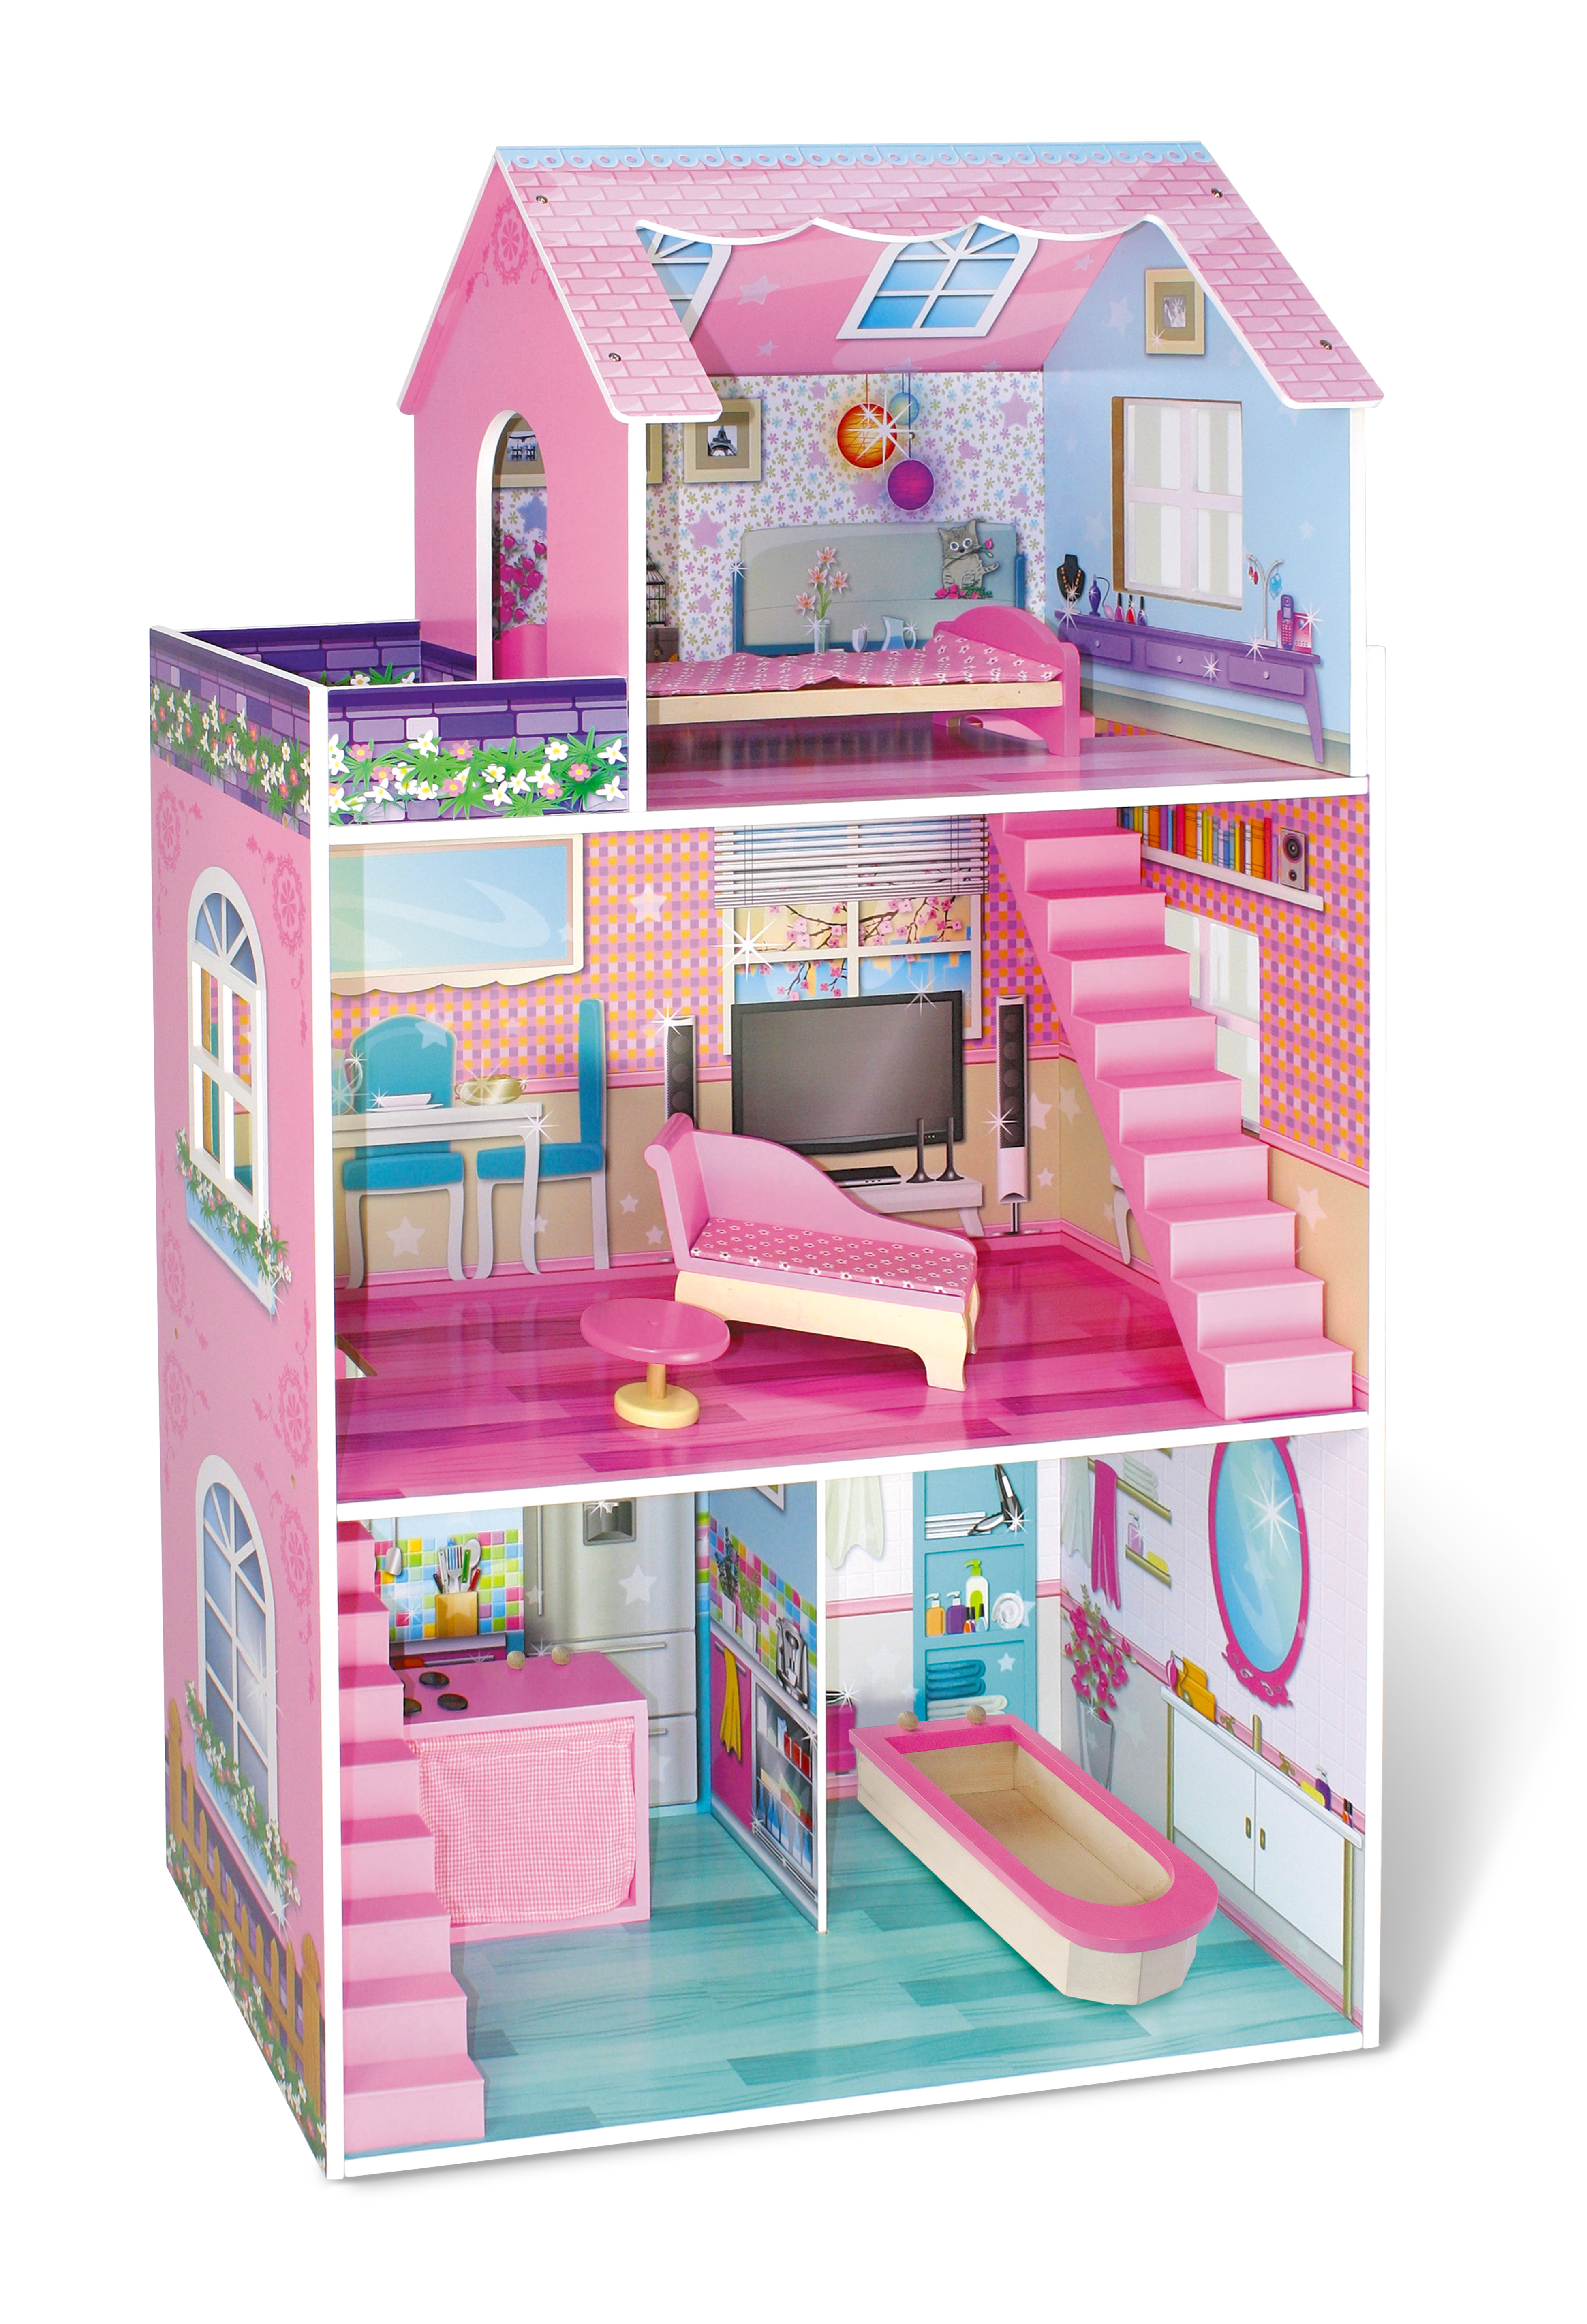 deals on doll houses